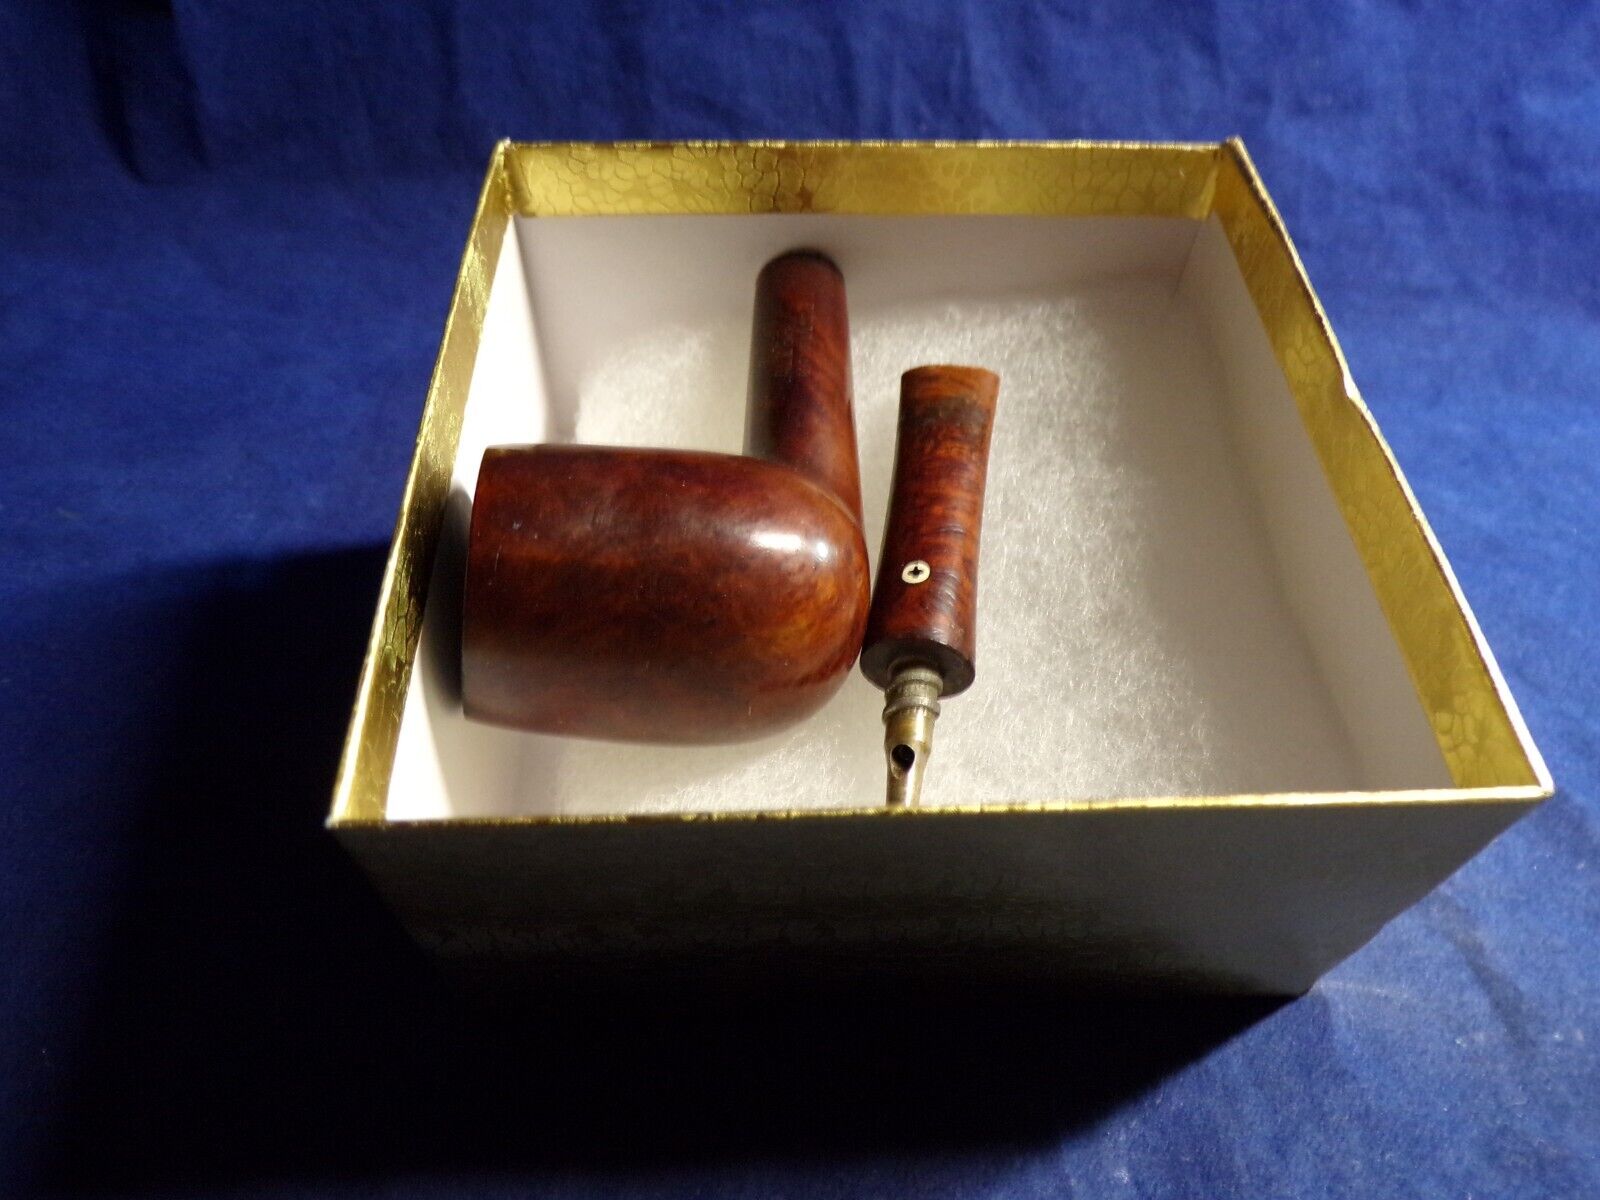 KAYWOODIE ALLBRIAR SMOKED Pipe Model 22 A Rarest of the Rare Collectable